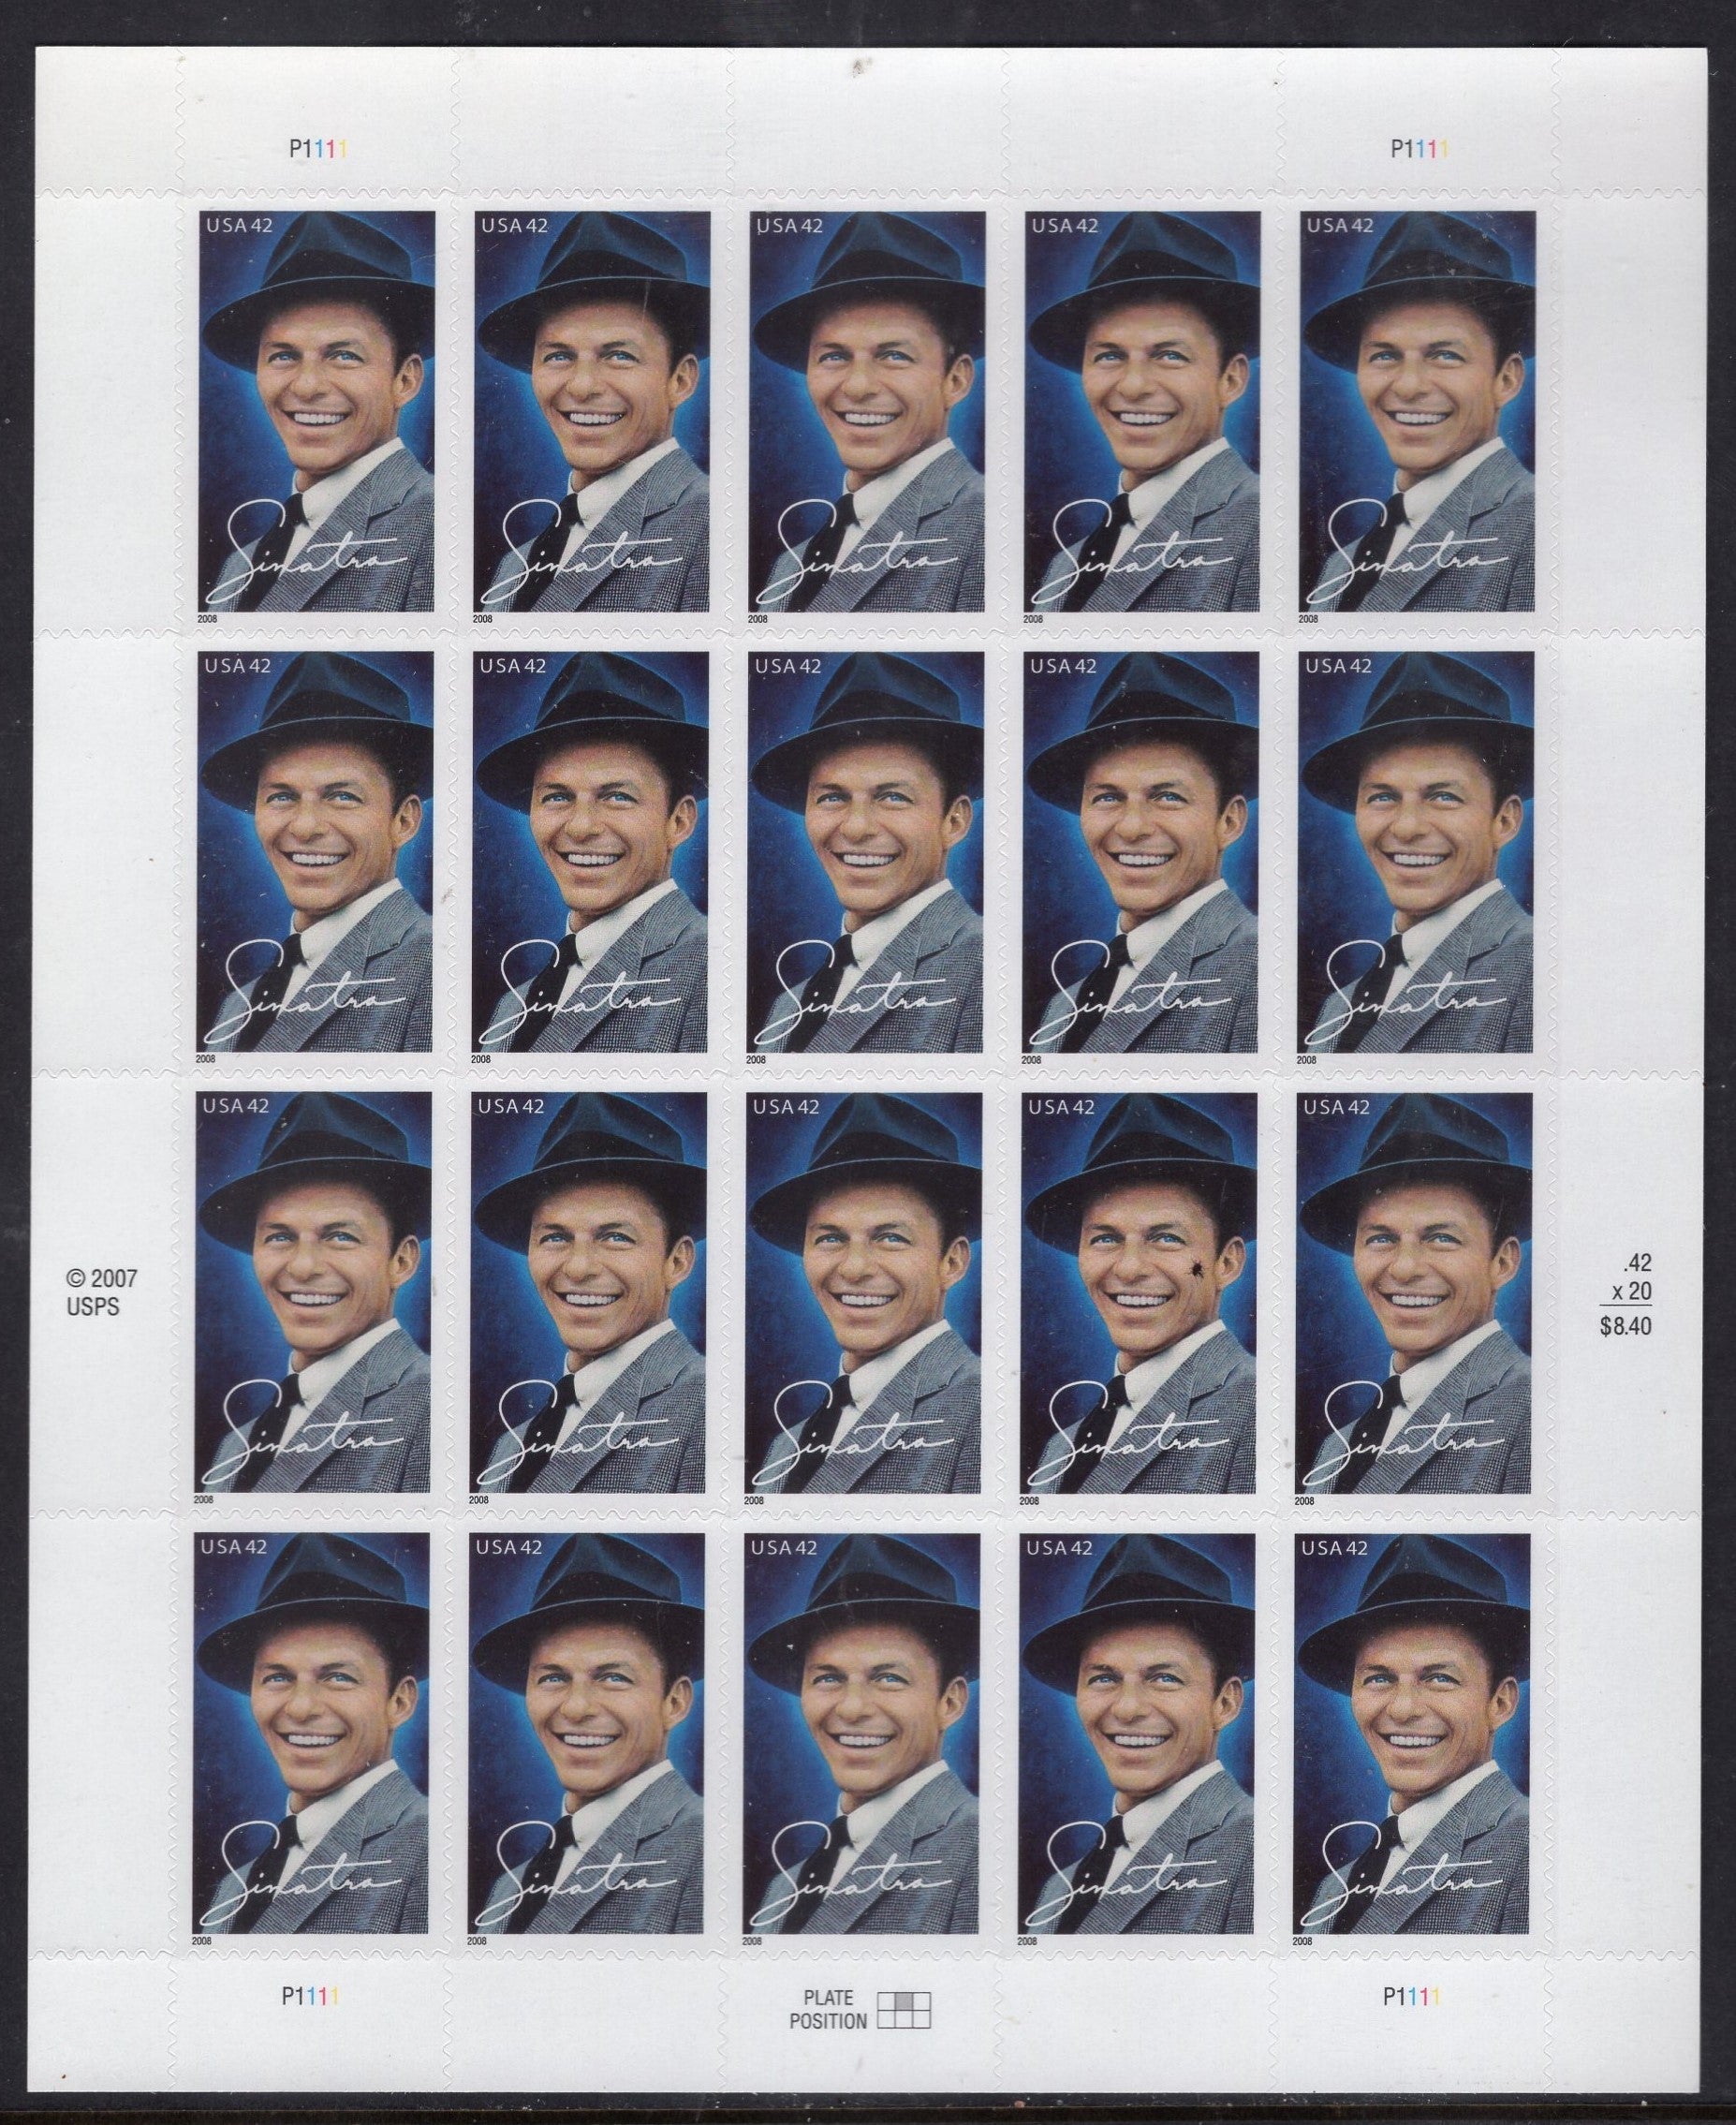 FRANK SINATRA "Blue Eyes" Singer Actor "From Here to Eternity" - "The Rat Pack" Sheet of 20 Stamps - Fresh Bright USA Postage Stamps - Issued in 2008